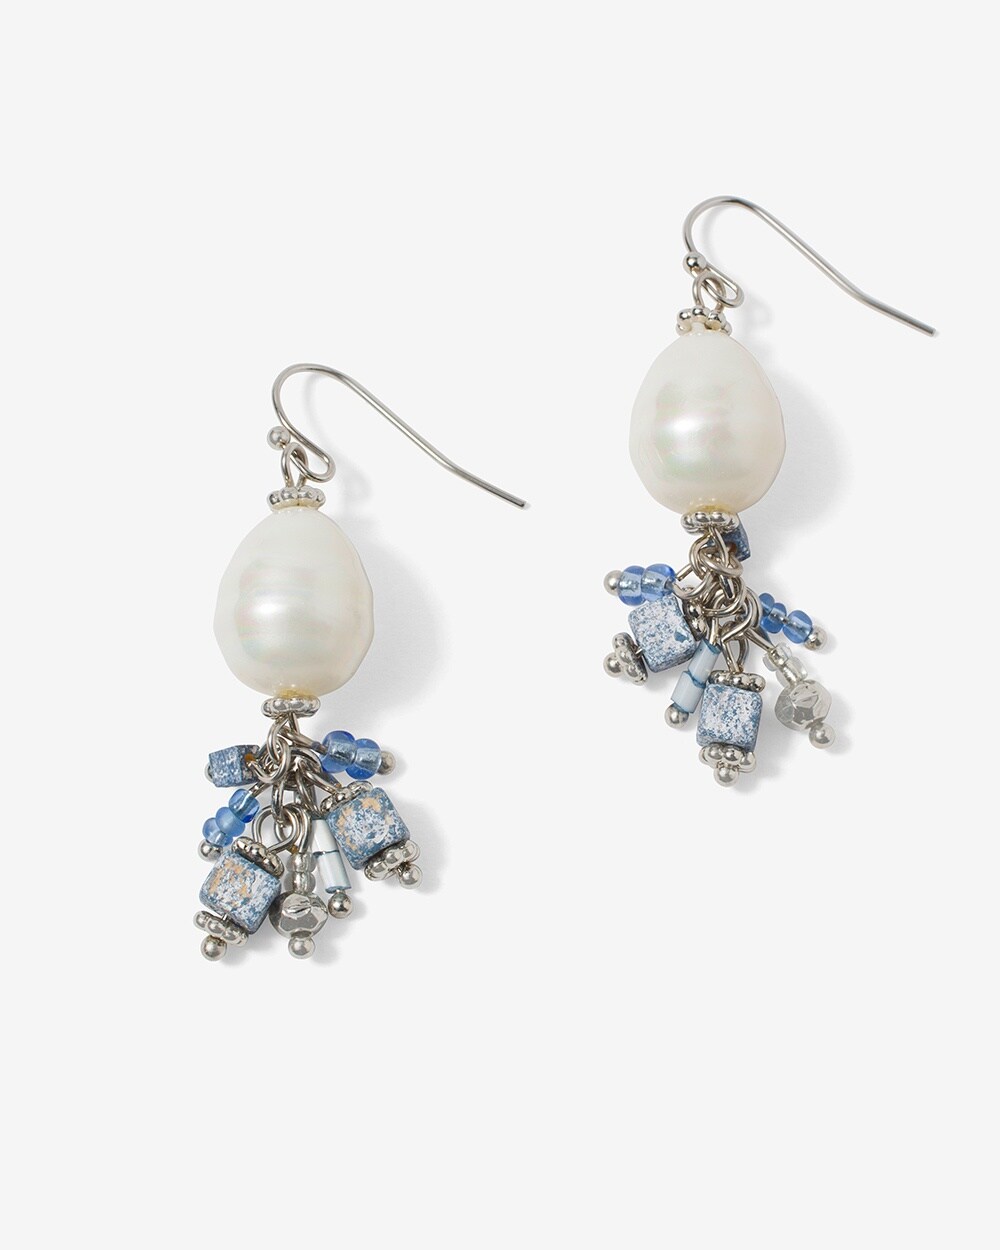 Blue Twist Beads and Pearls Earrings